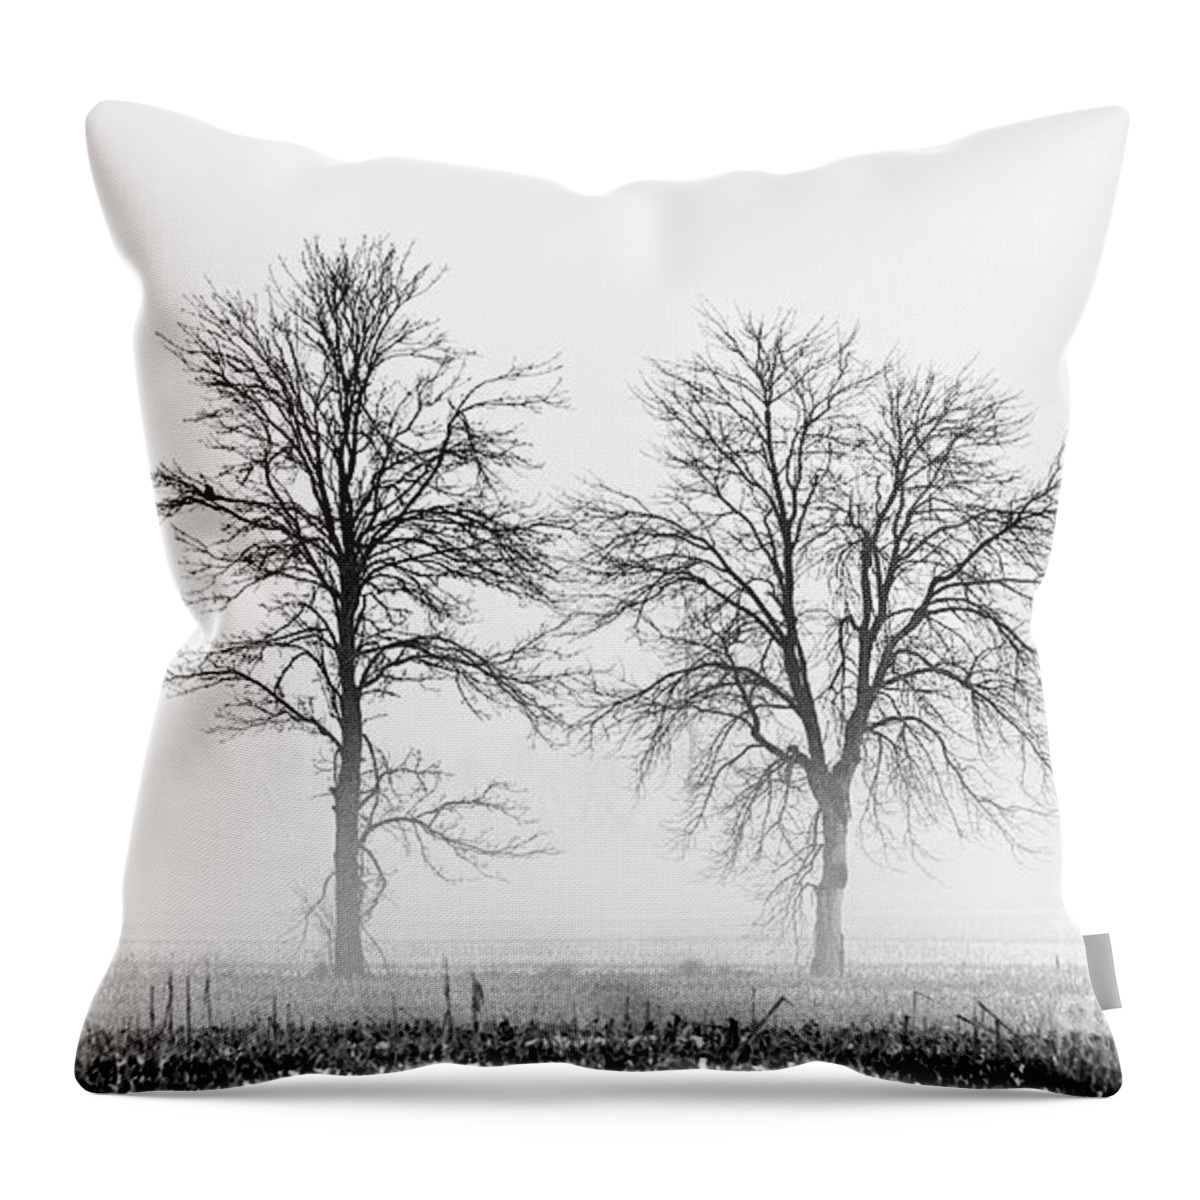 Nina Stavlund Throw Pillow featuring the photograph Two... by Nina Stavlund